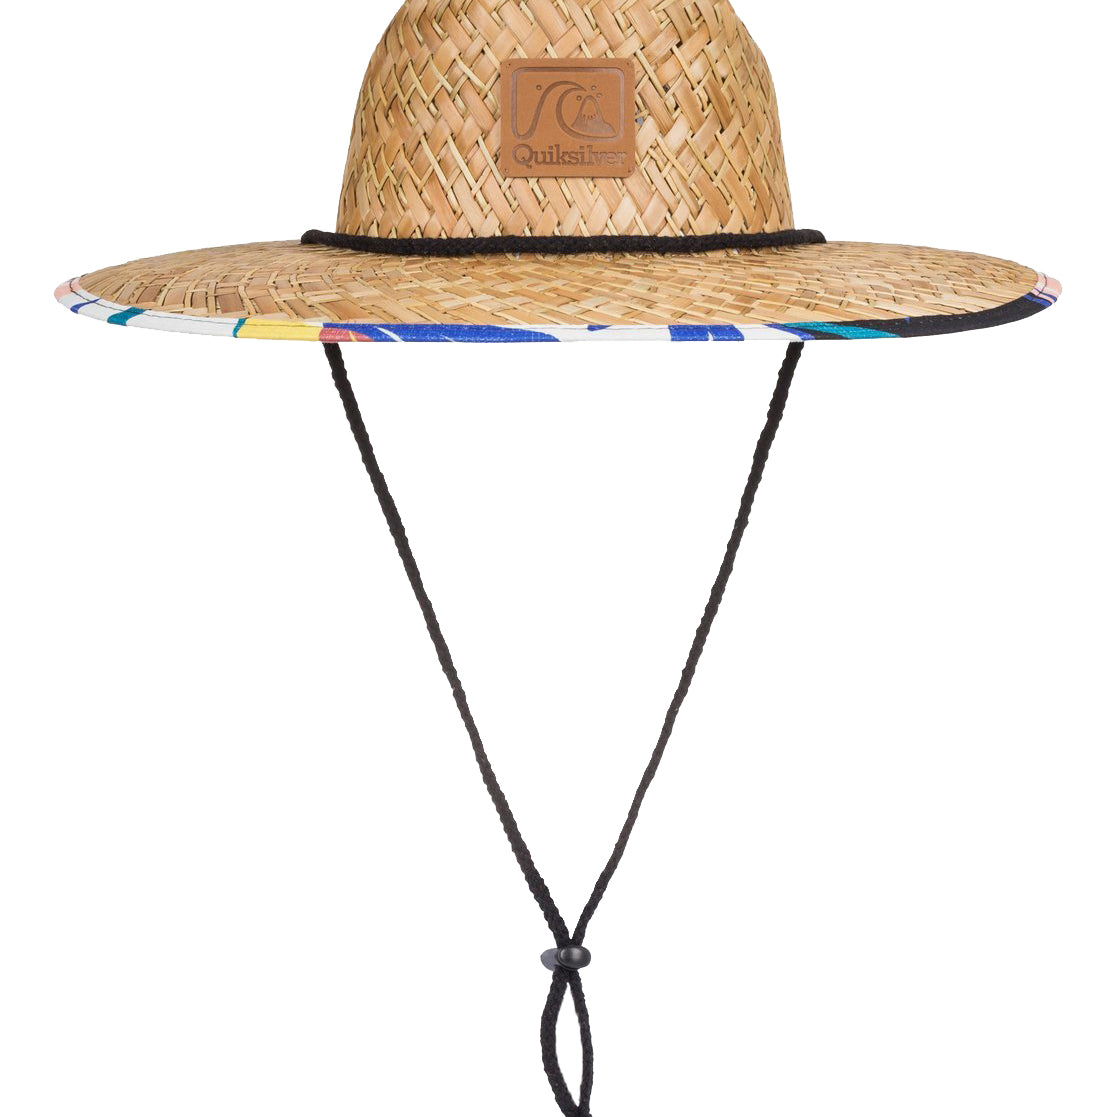 Quiksilver Outsider Straw Lifeguard Hat WBK0 S/M